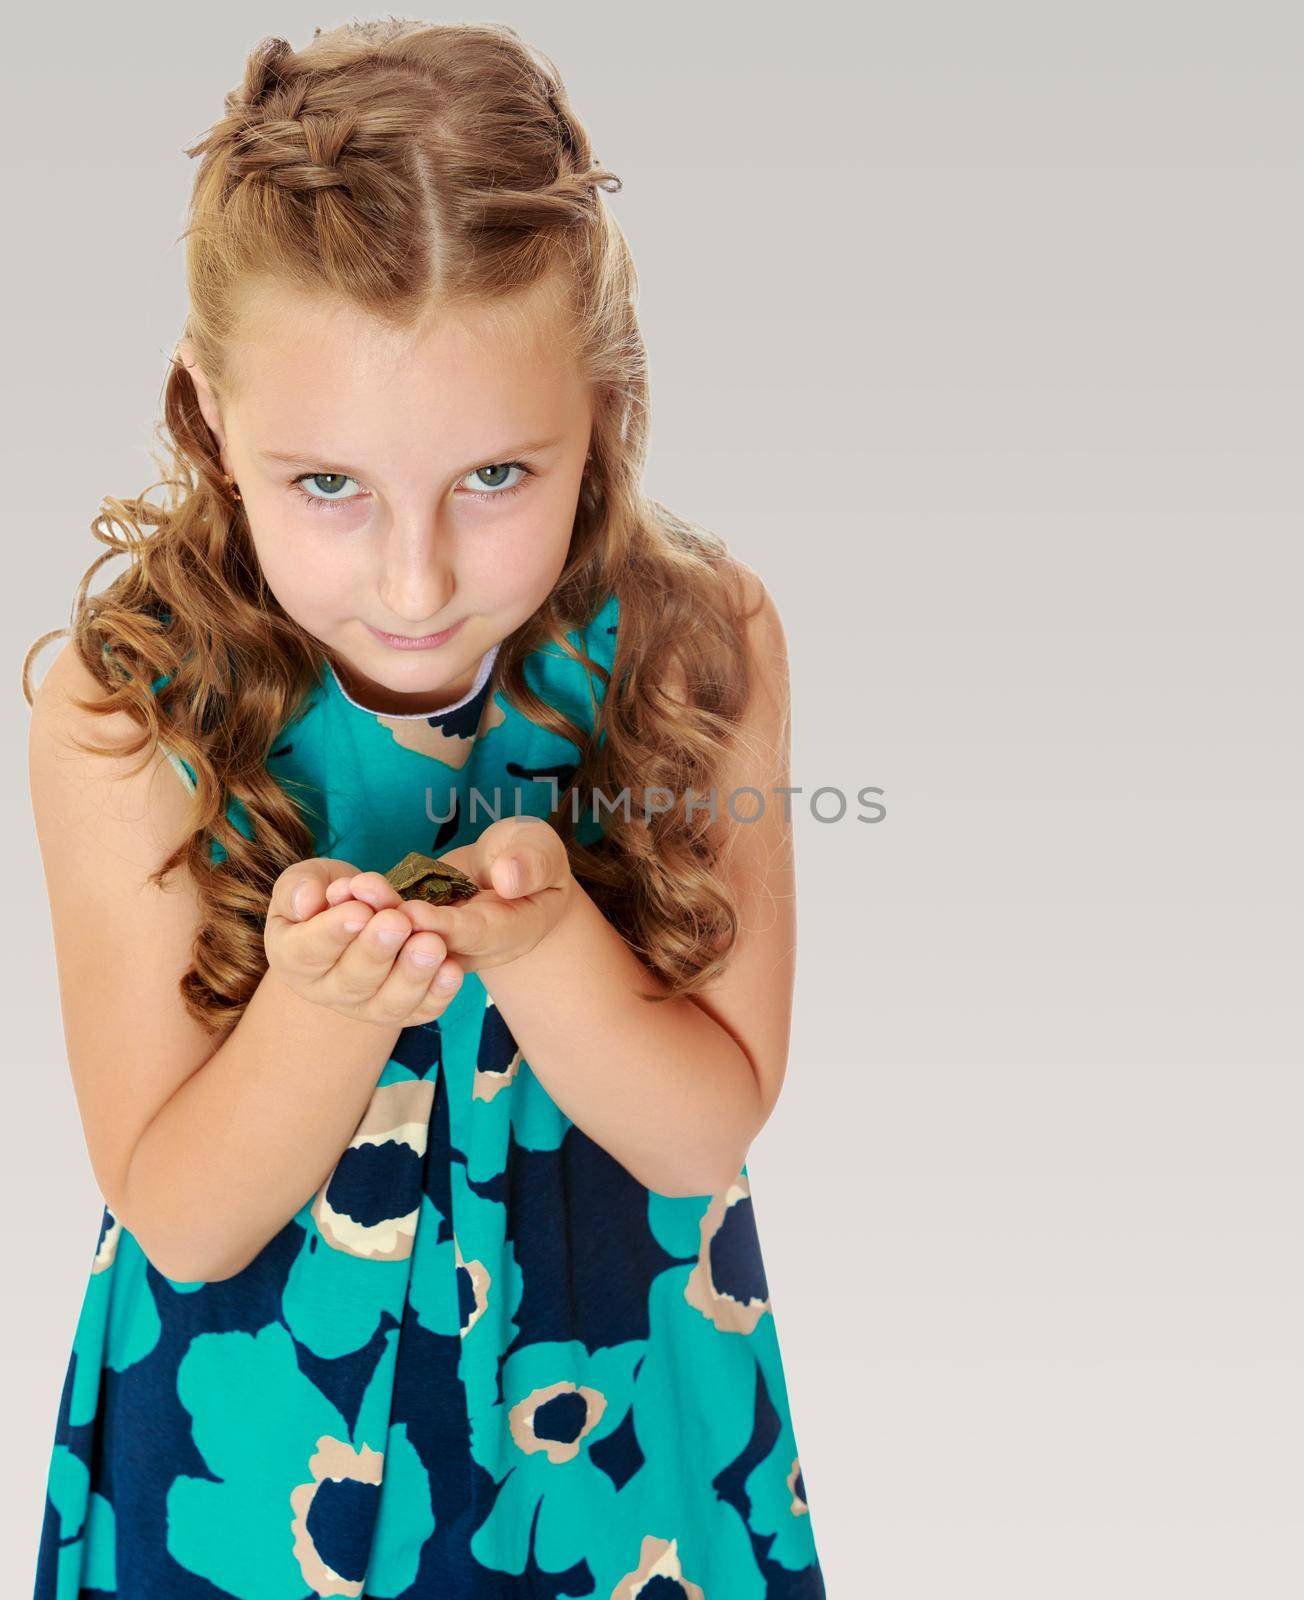 little girl holding in hands a small turtle. by kolesnikov_studio